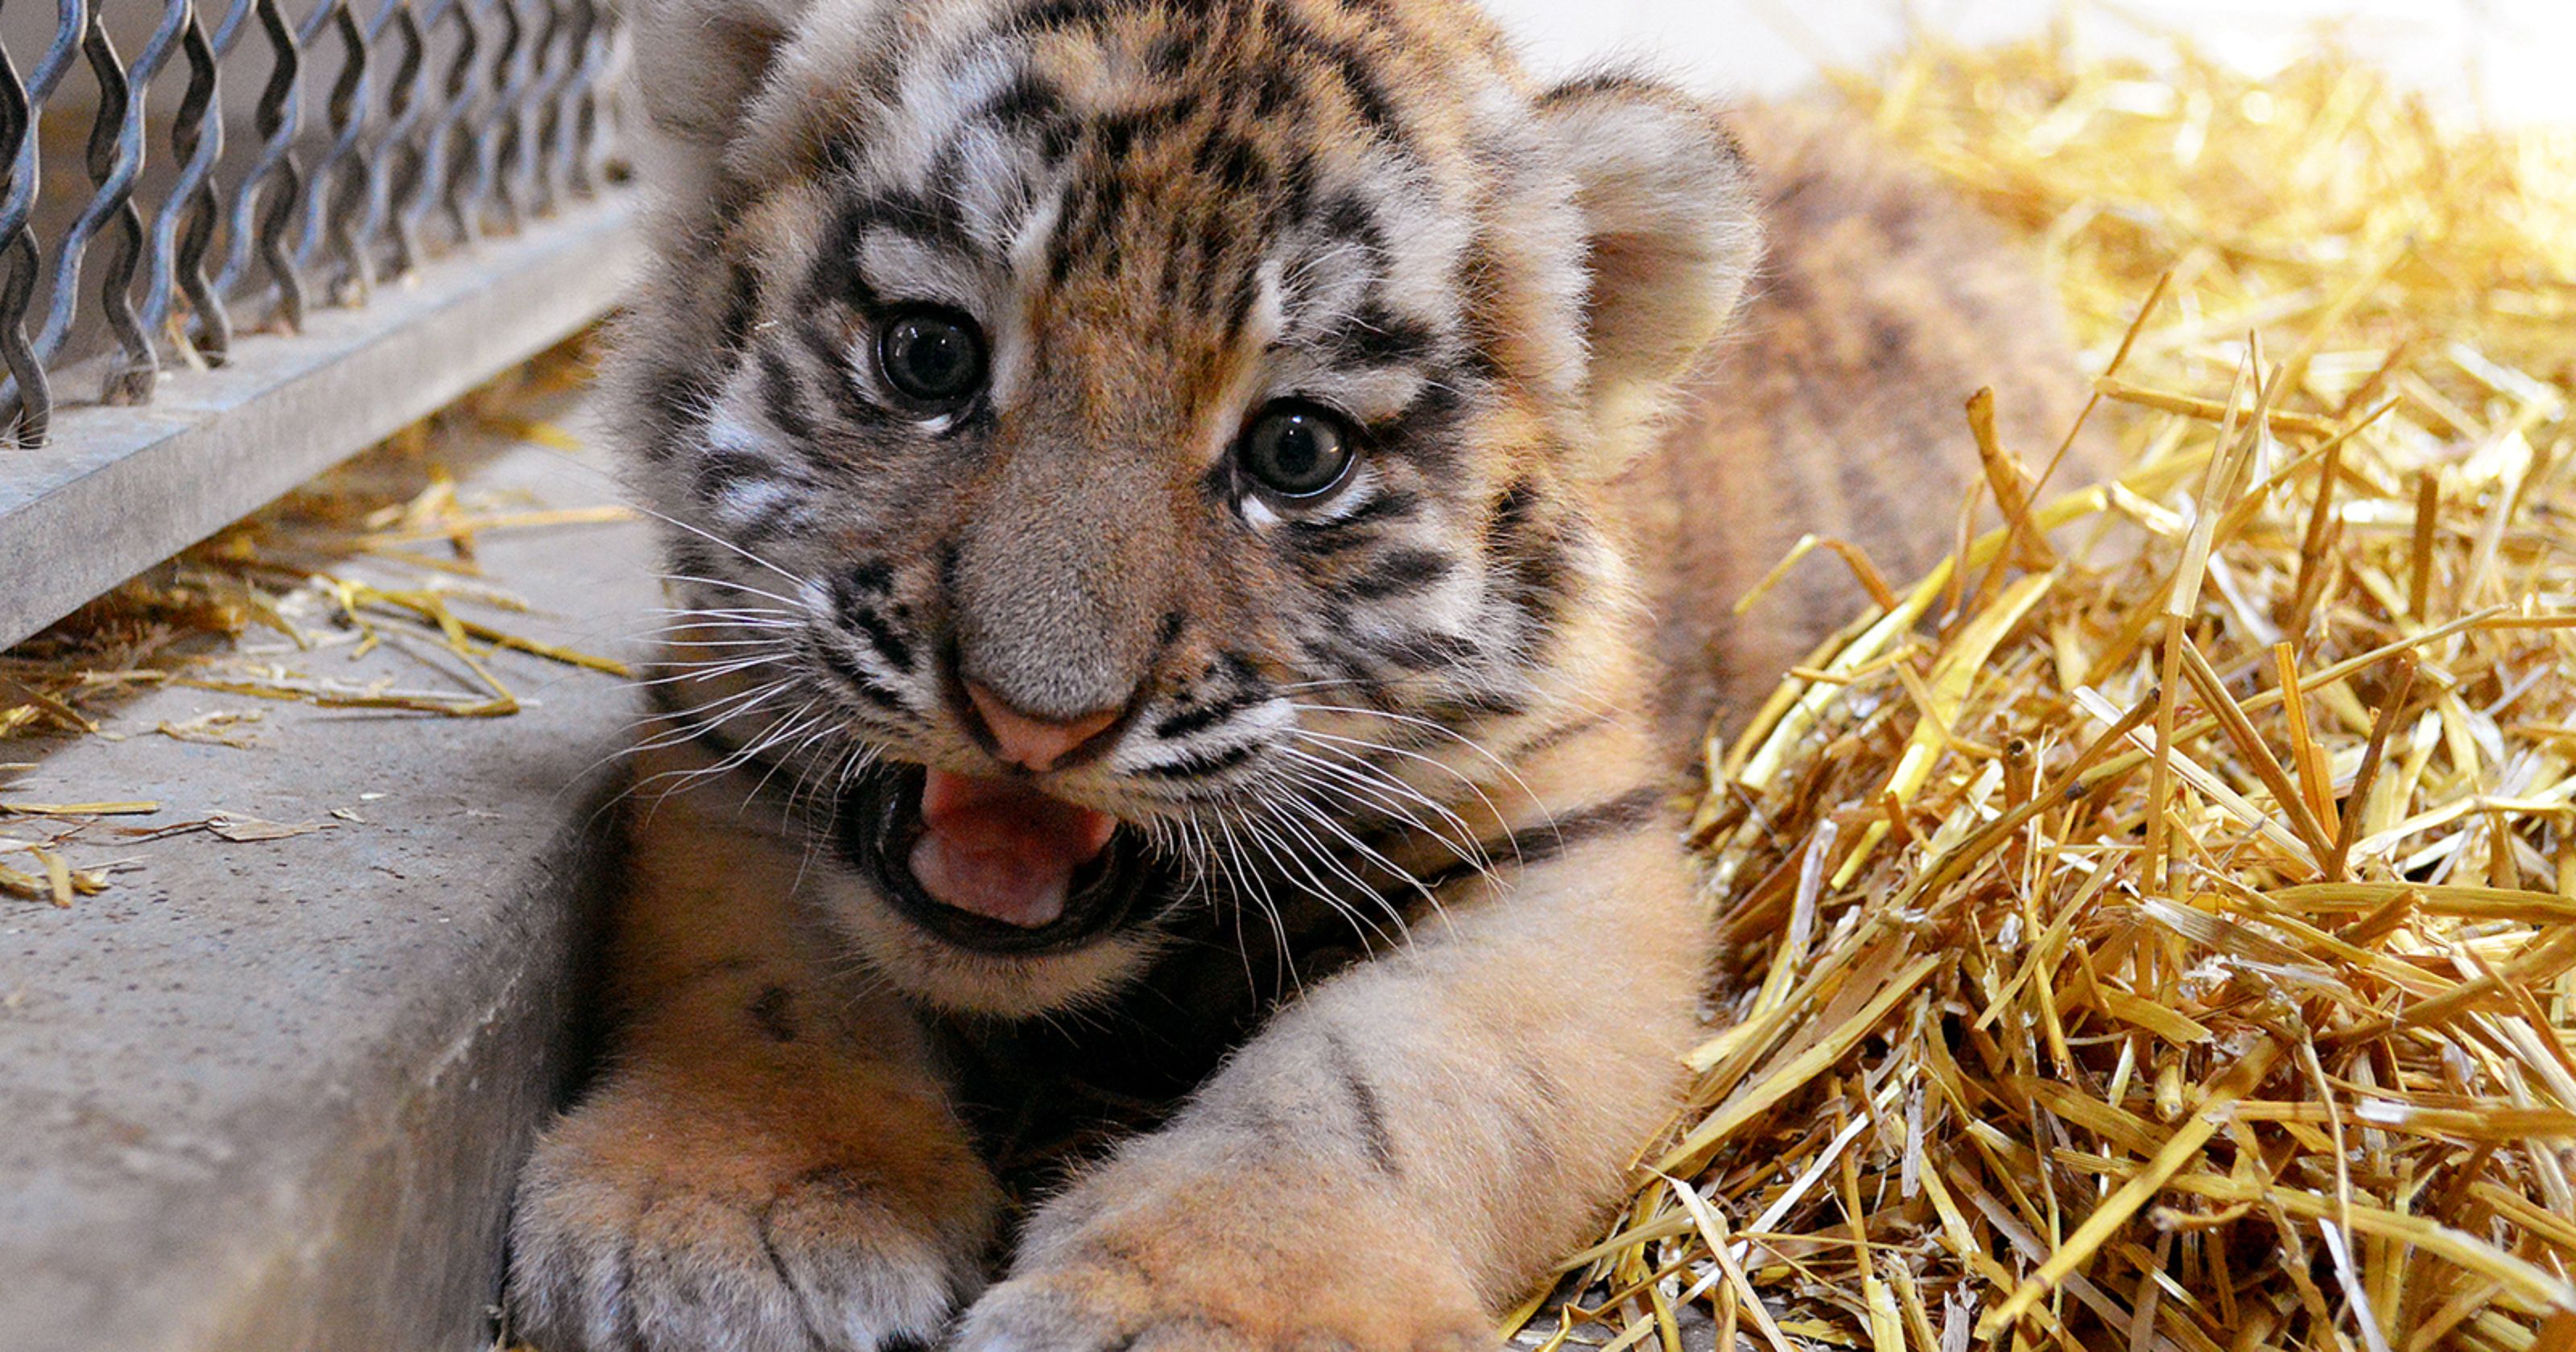 What's in a name? Zoo invites public to name tiger cub